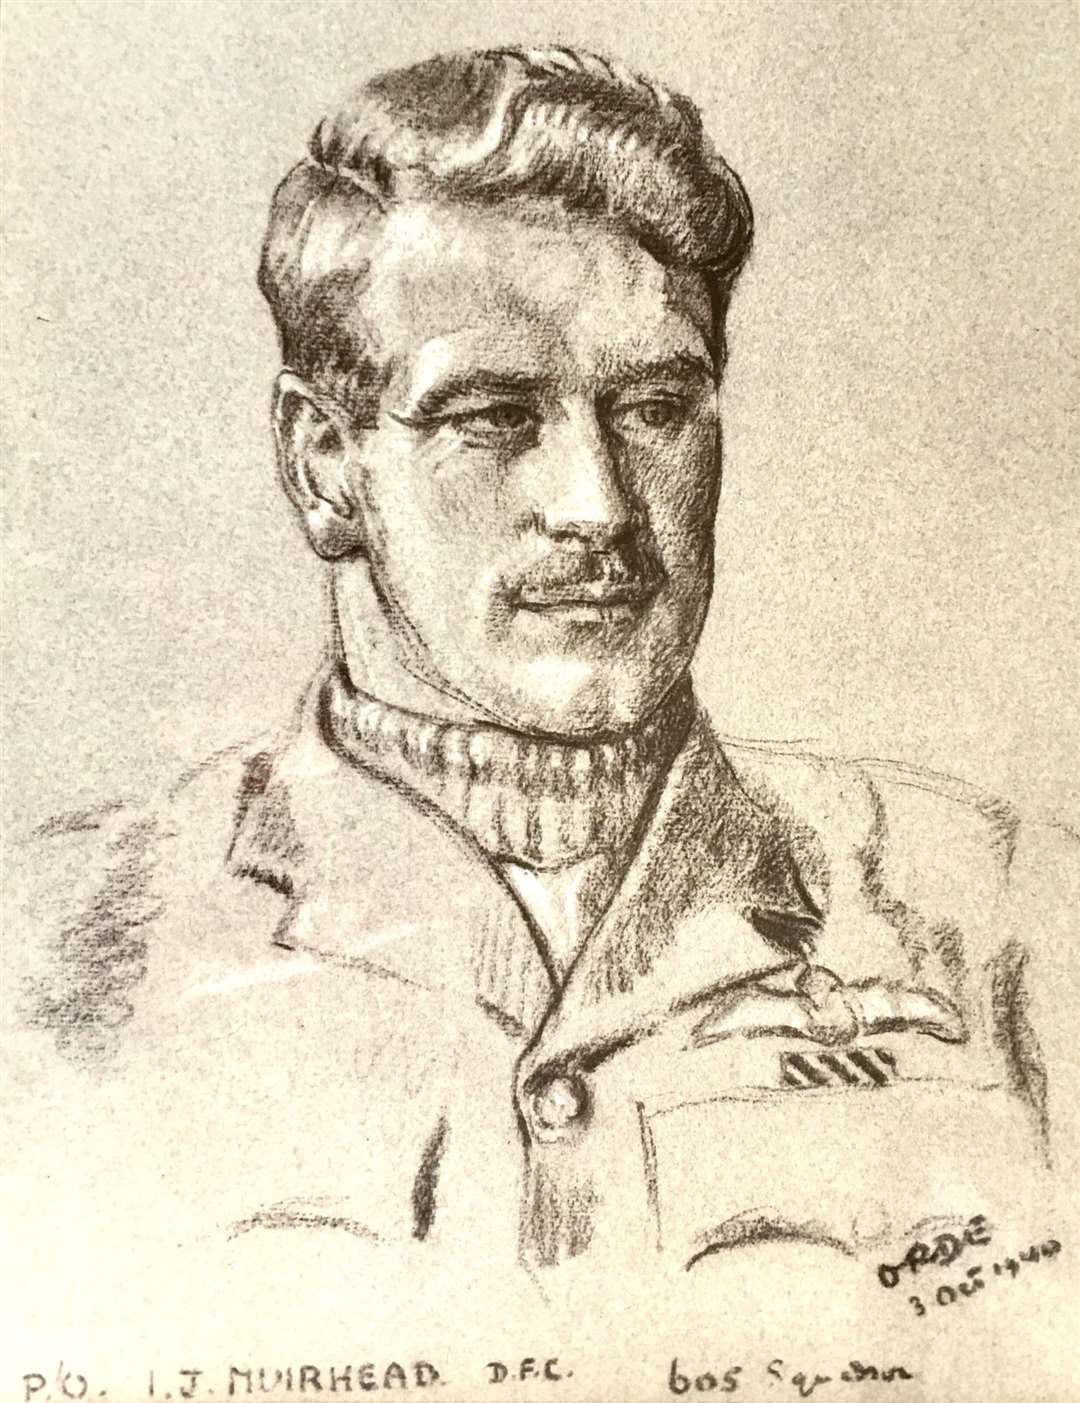 Drawing of Flt Lt Ian James Muirhead from just 12 days before his death